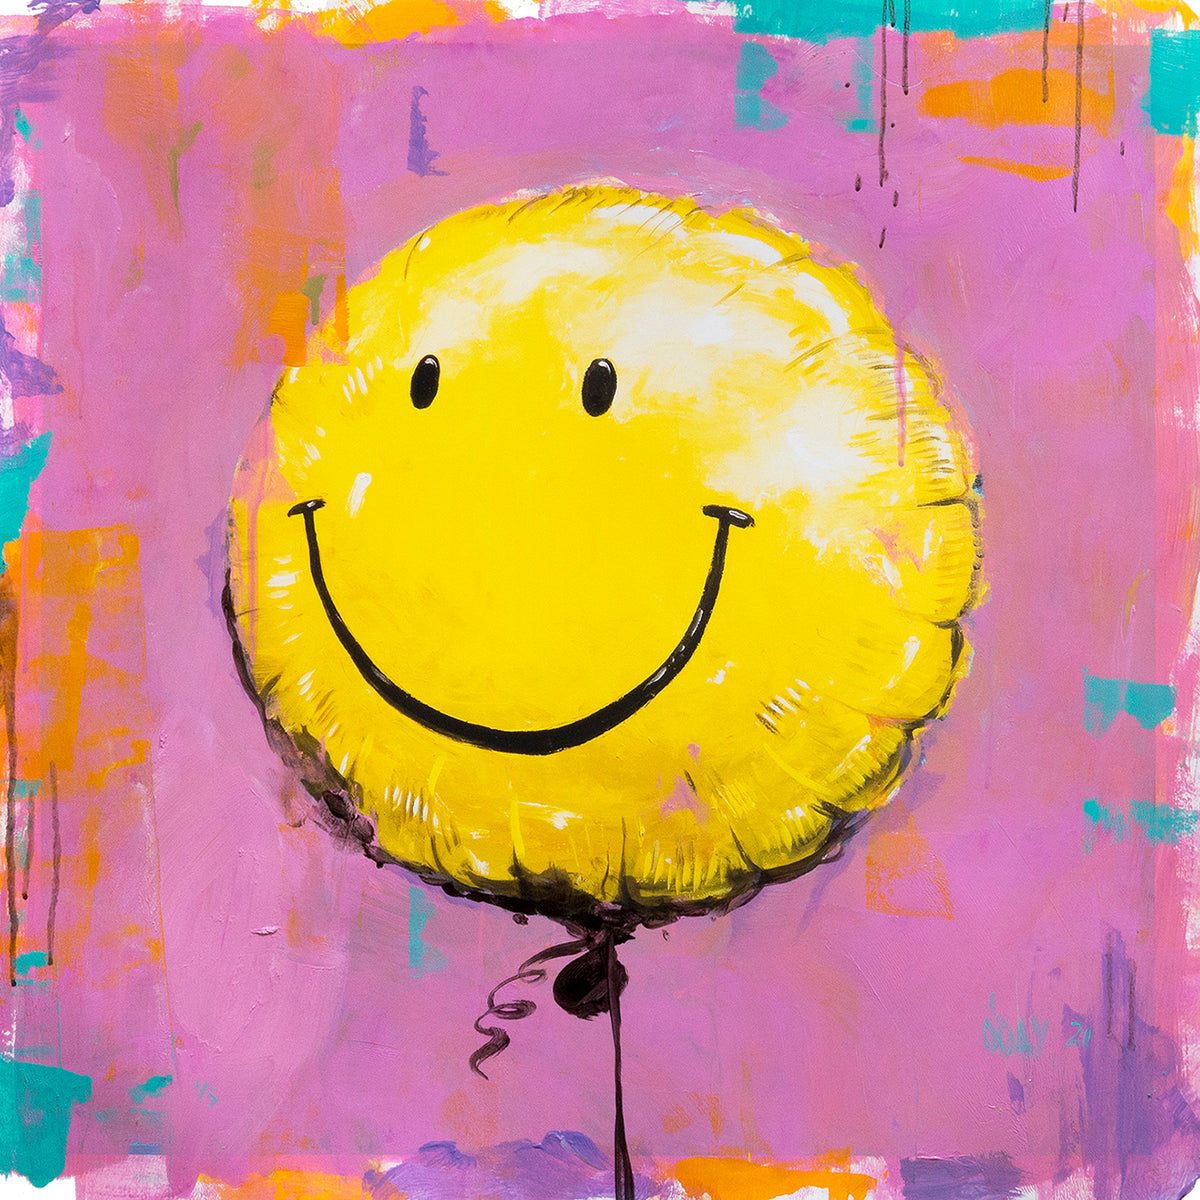 Adam J. O&#39;Day &quot;Smiley Face Balloon: Pink&quot; - Unique Hand-Painted Print - 24 x 24&quot;